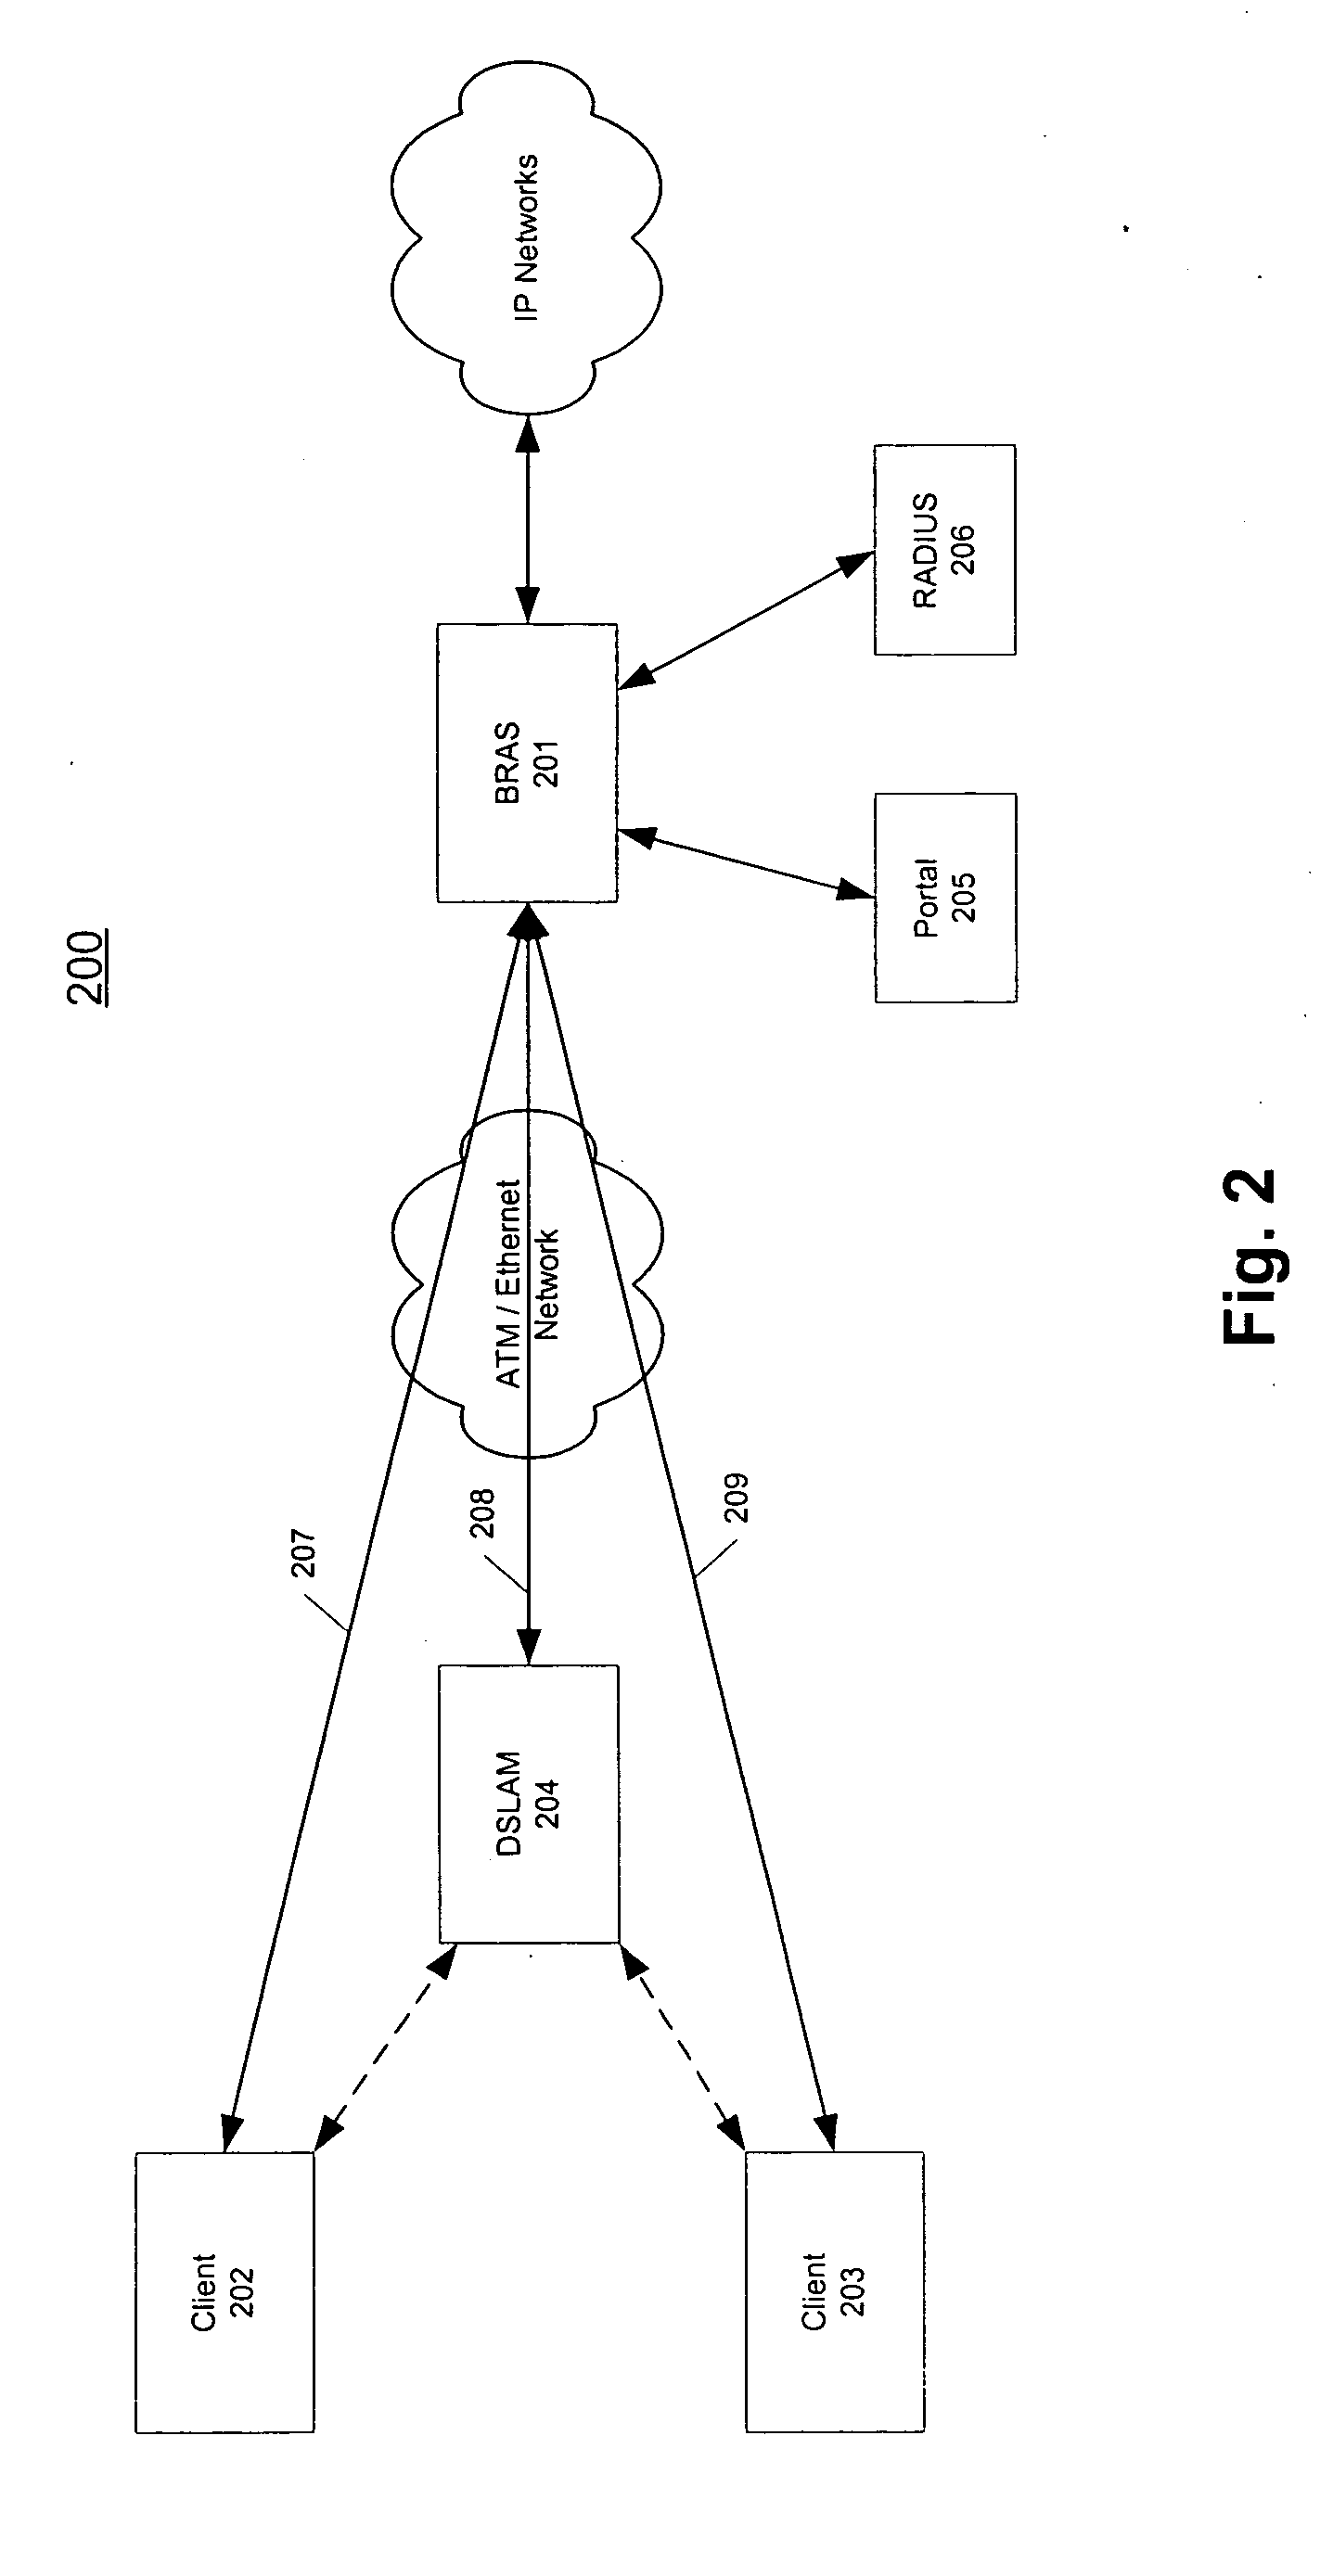 Protocol for messaging between a centralized broadband remote aggregation server and other devices